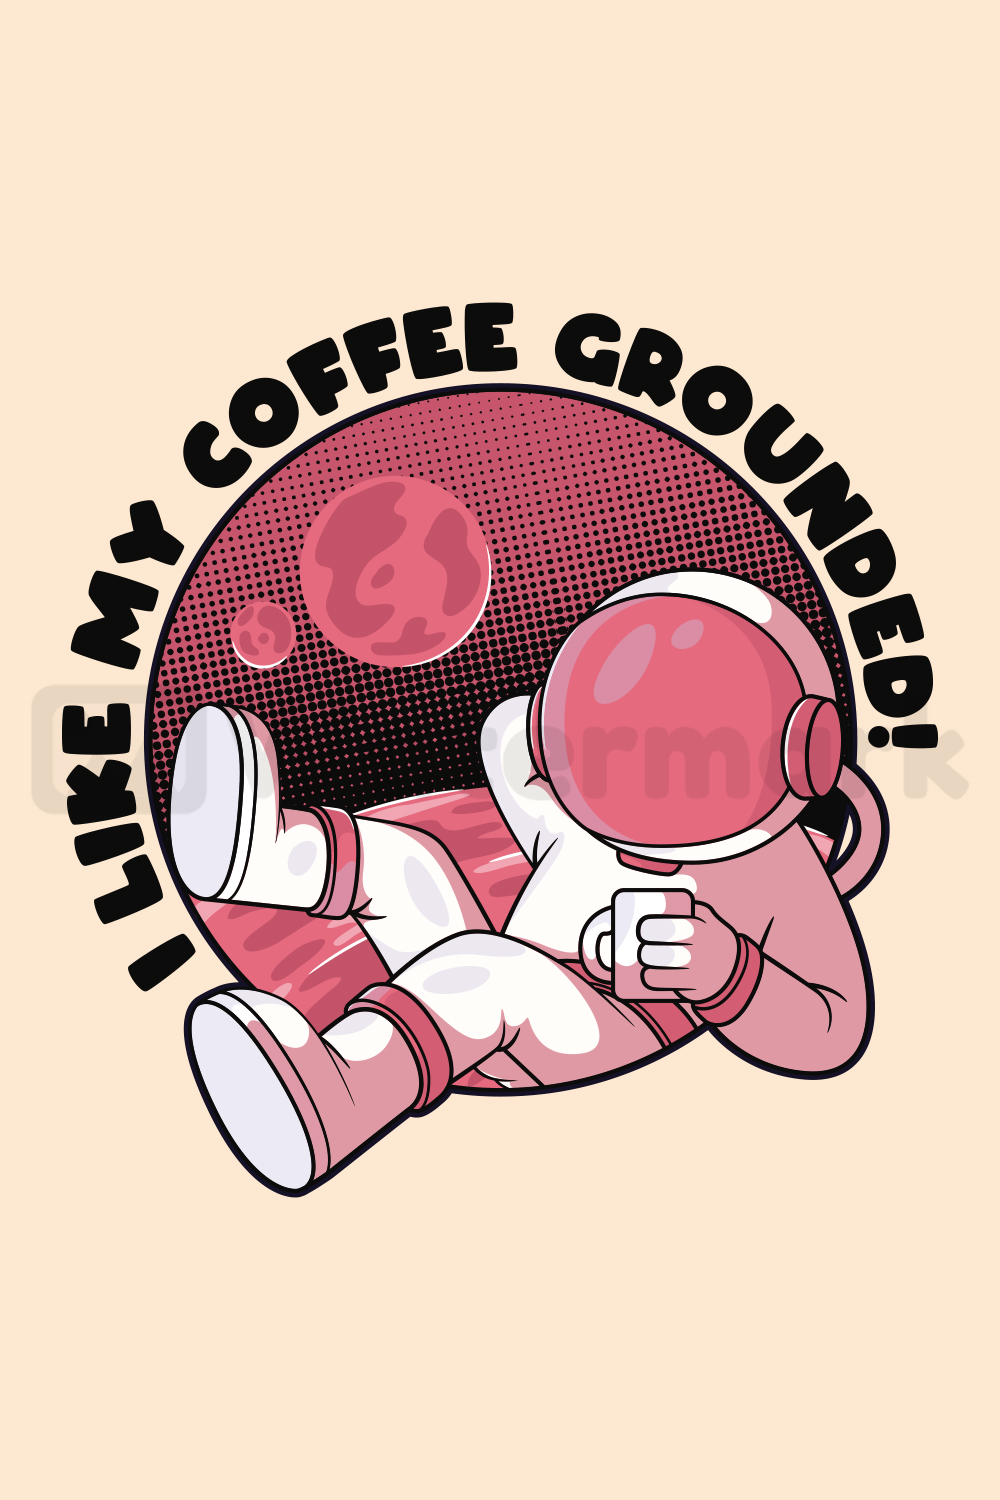 Grounded! pinterest preview image.